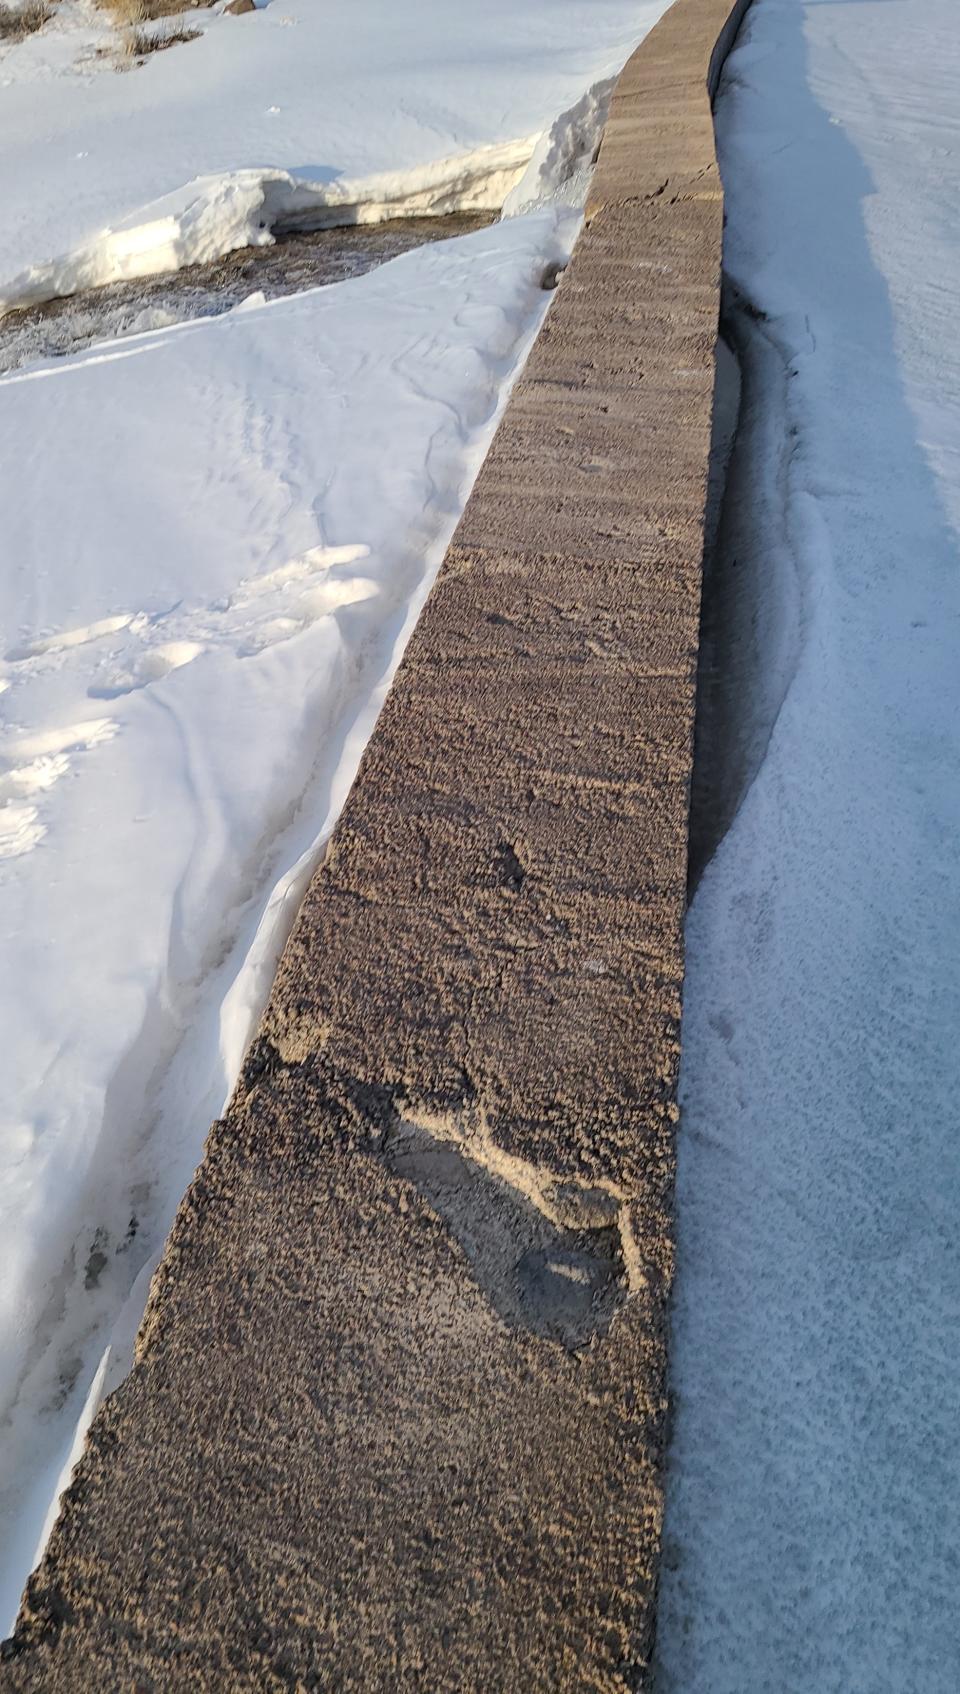 Panguitch Lake Dam suffered damage resulting in a crack in its upper portion (Courtesy: Dave Dodds / Garfield Co. Public Works)